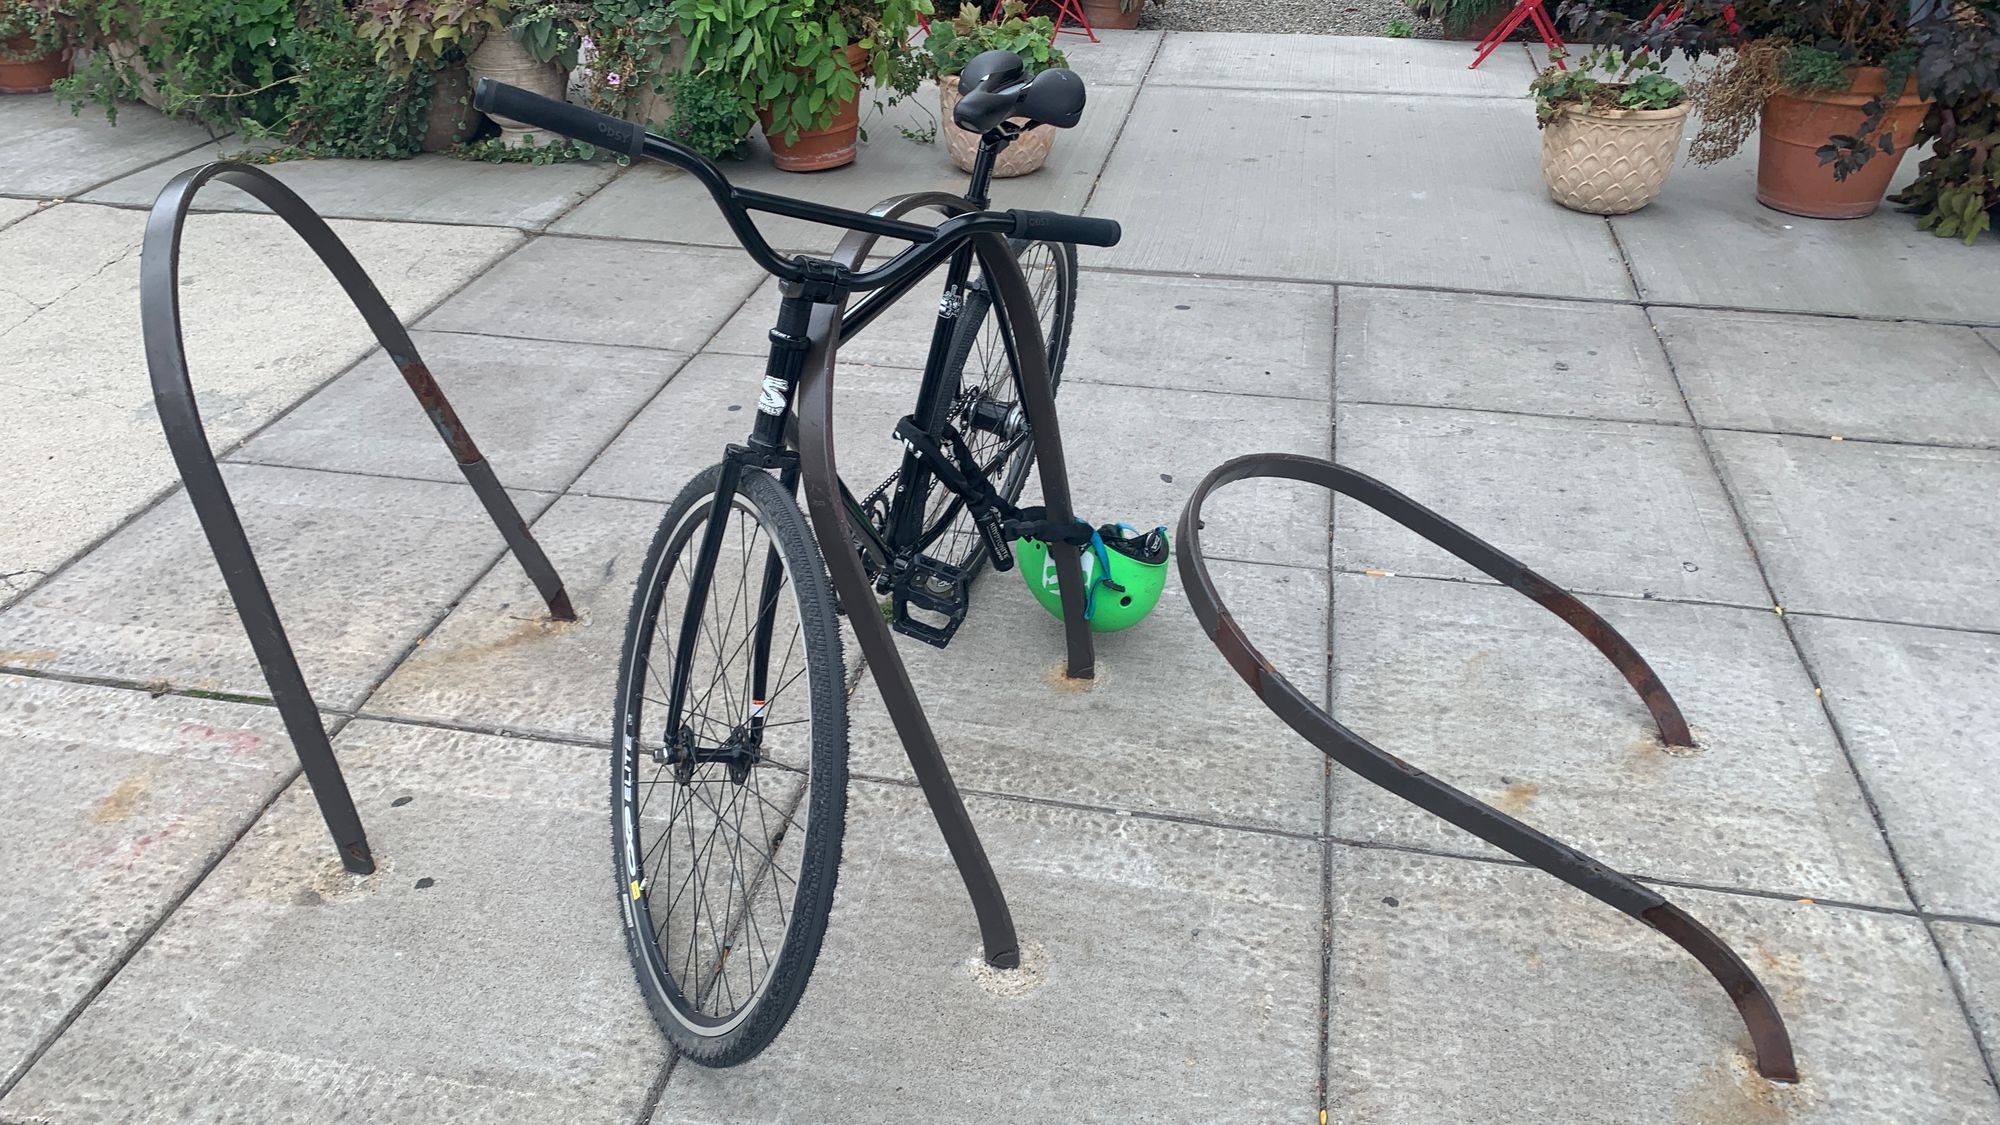 A bicycle is parked in a set of inverted u-shaped bike racks. The racks appear to have been hit by a car and are dramatically bent out of shape.